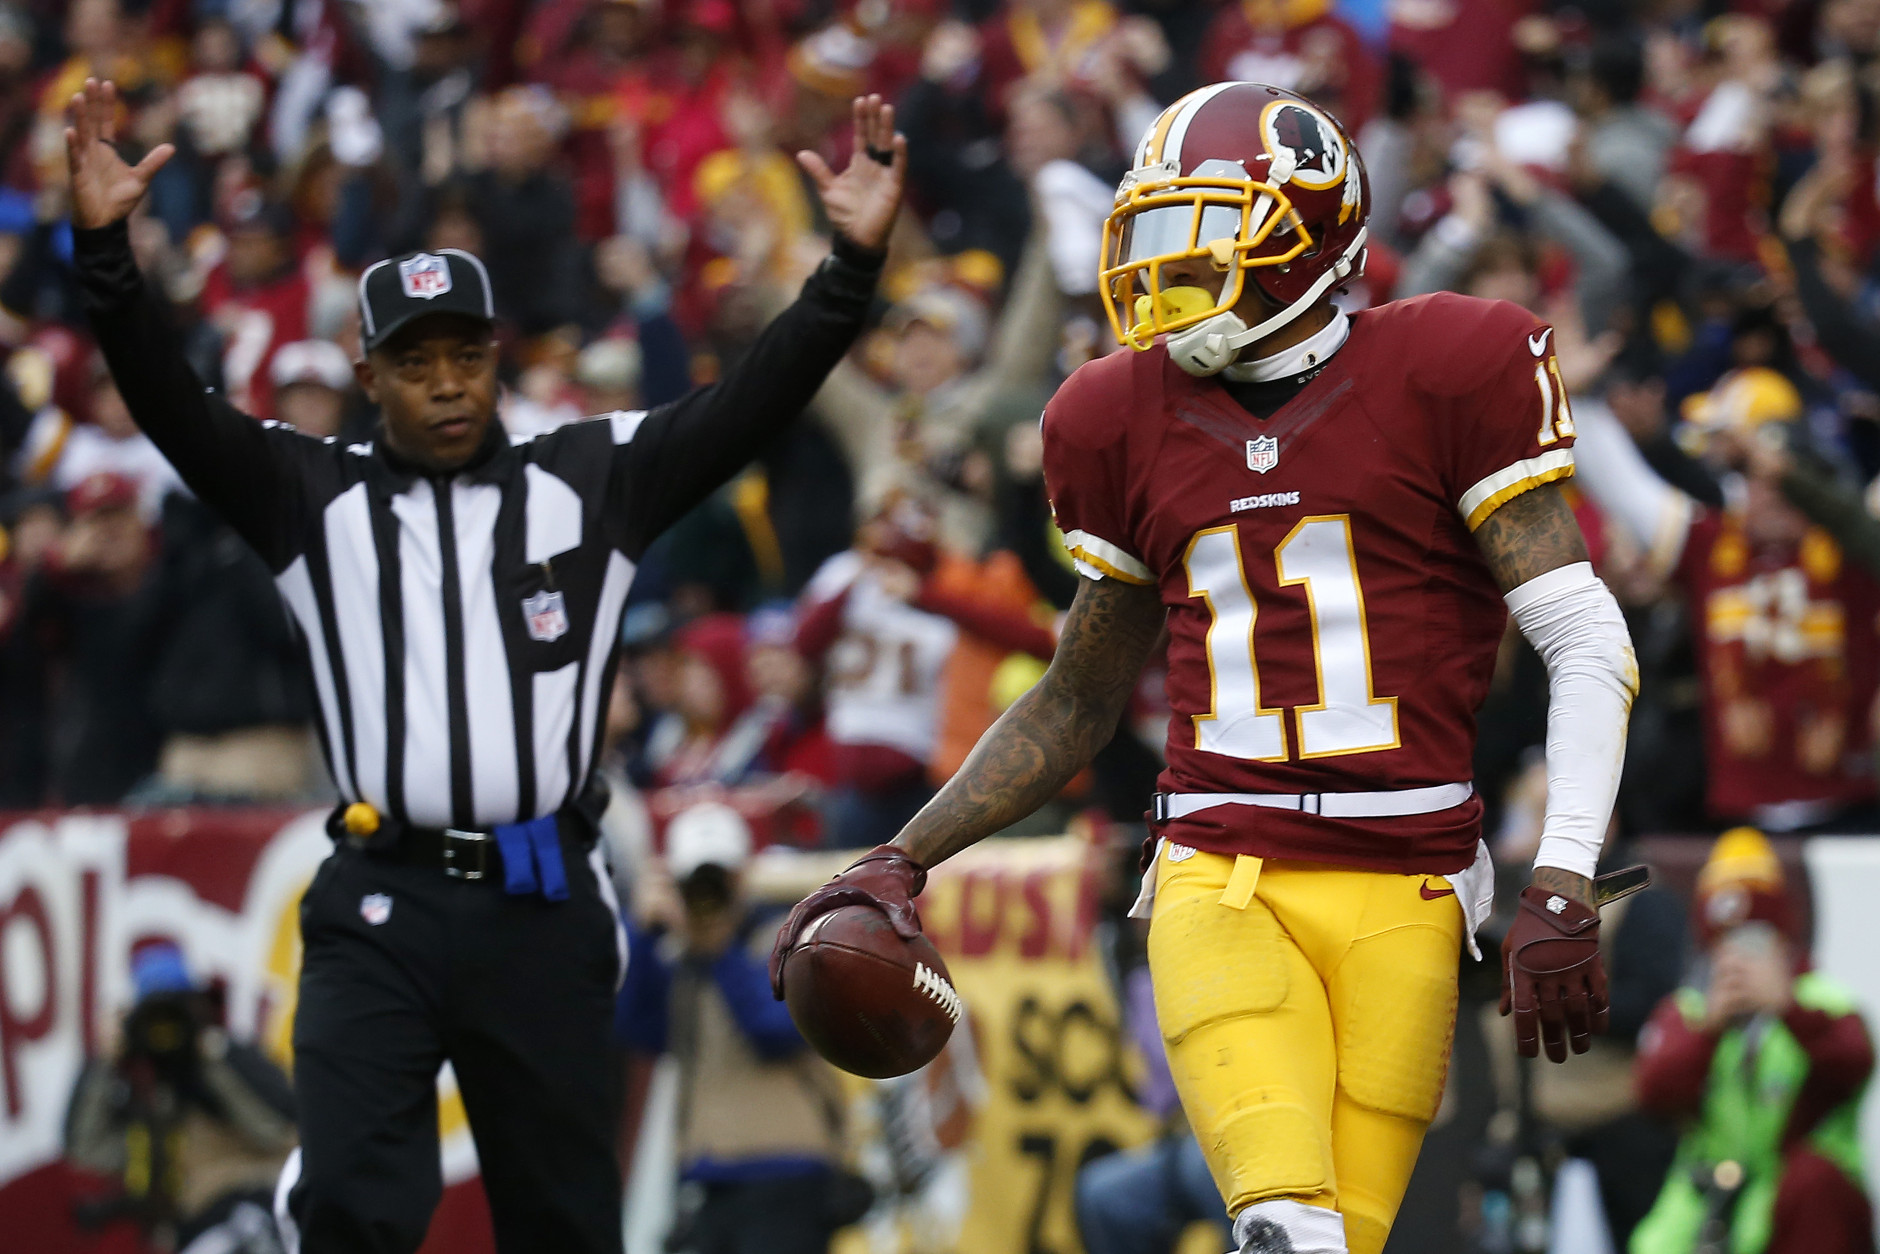 LANDOVER, MD - NOVEMBER 29: Wide receiver DeSean Jackson #11 of the Washington Redskins scores a second quarter touchdown against the New York Giants at FedExField on November 29, 2015 in Landover, Maryland. (Photo by Rob Carr/Getty Images)